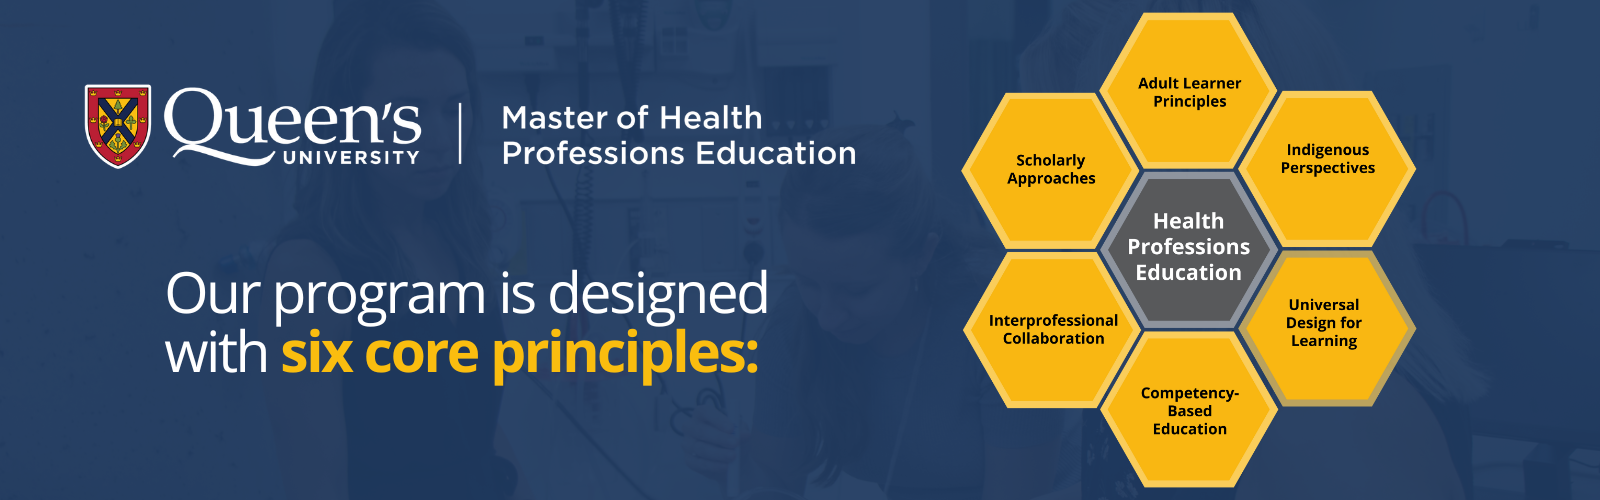 Master of Health Professions Education. Our Program is Designed with six core principles: Adult Learner Principles; Indigenous Perspectives; Universal Design for Learning; Competency-Based Education; Interprofessional Collaboration; Scholarly Approaches